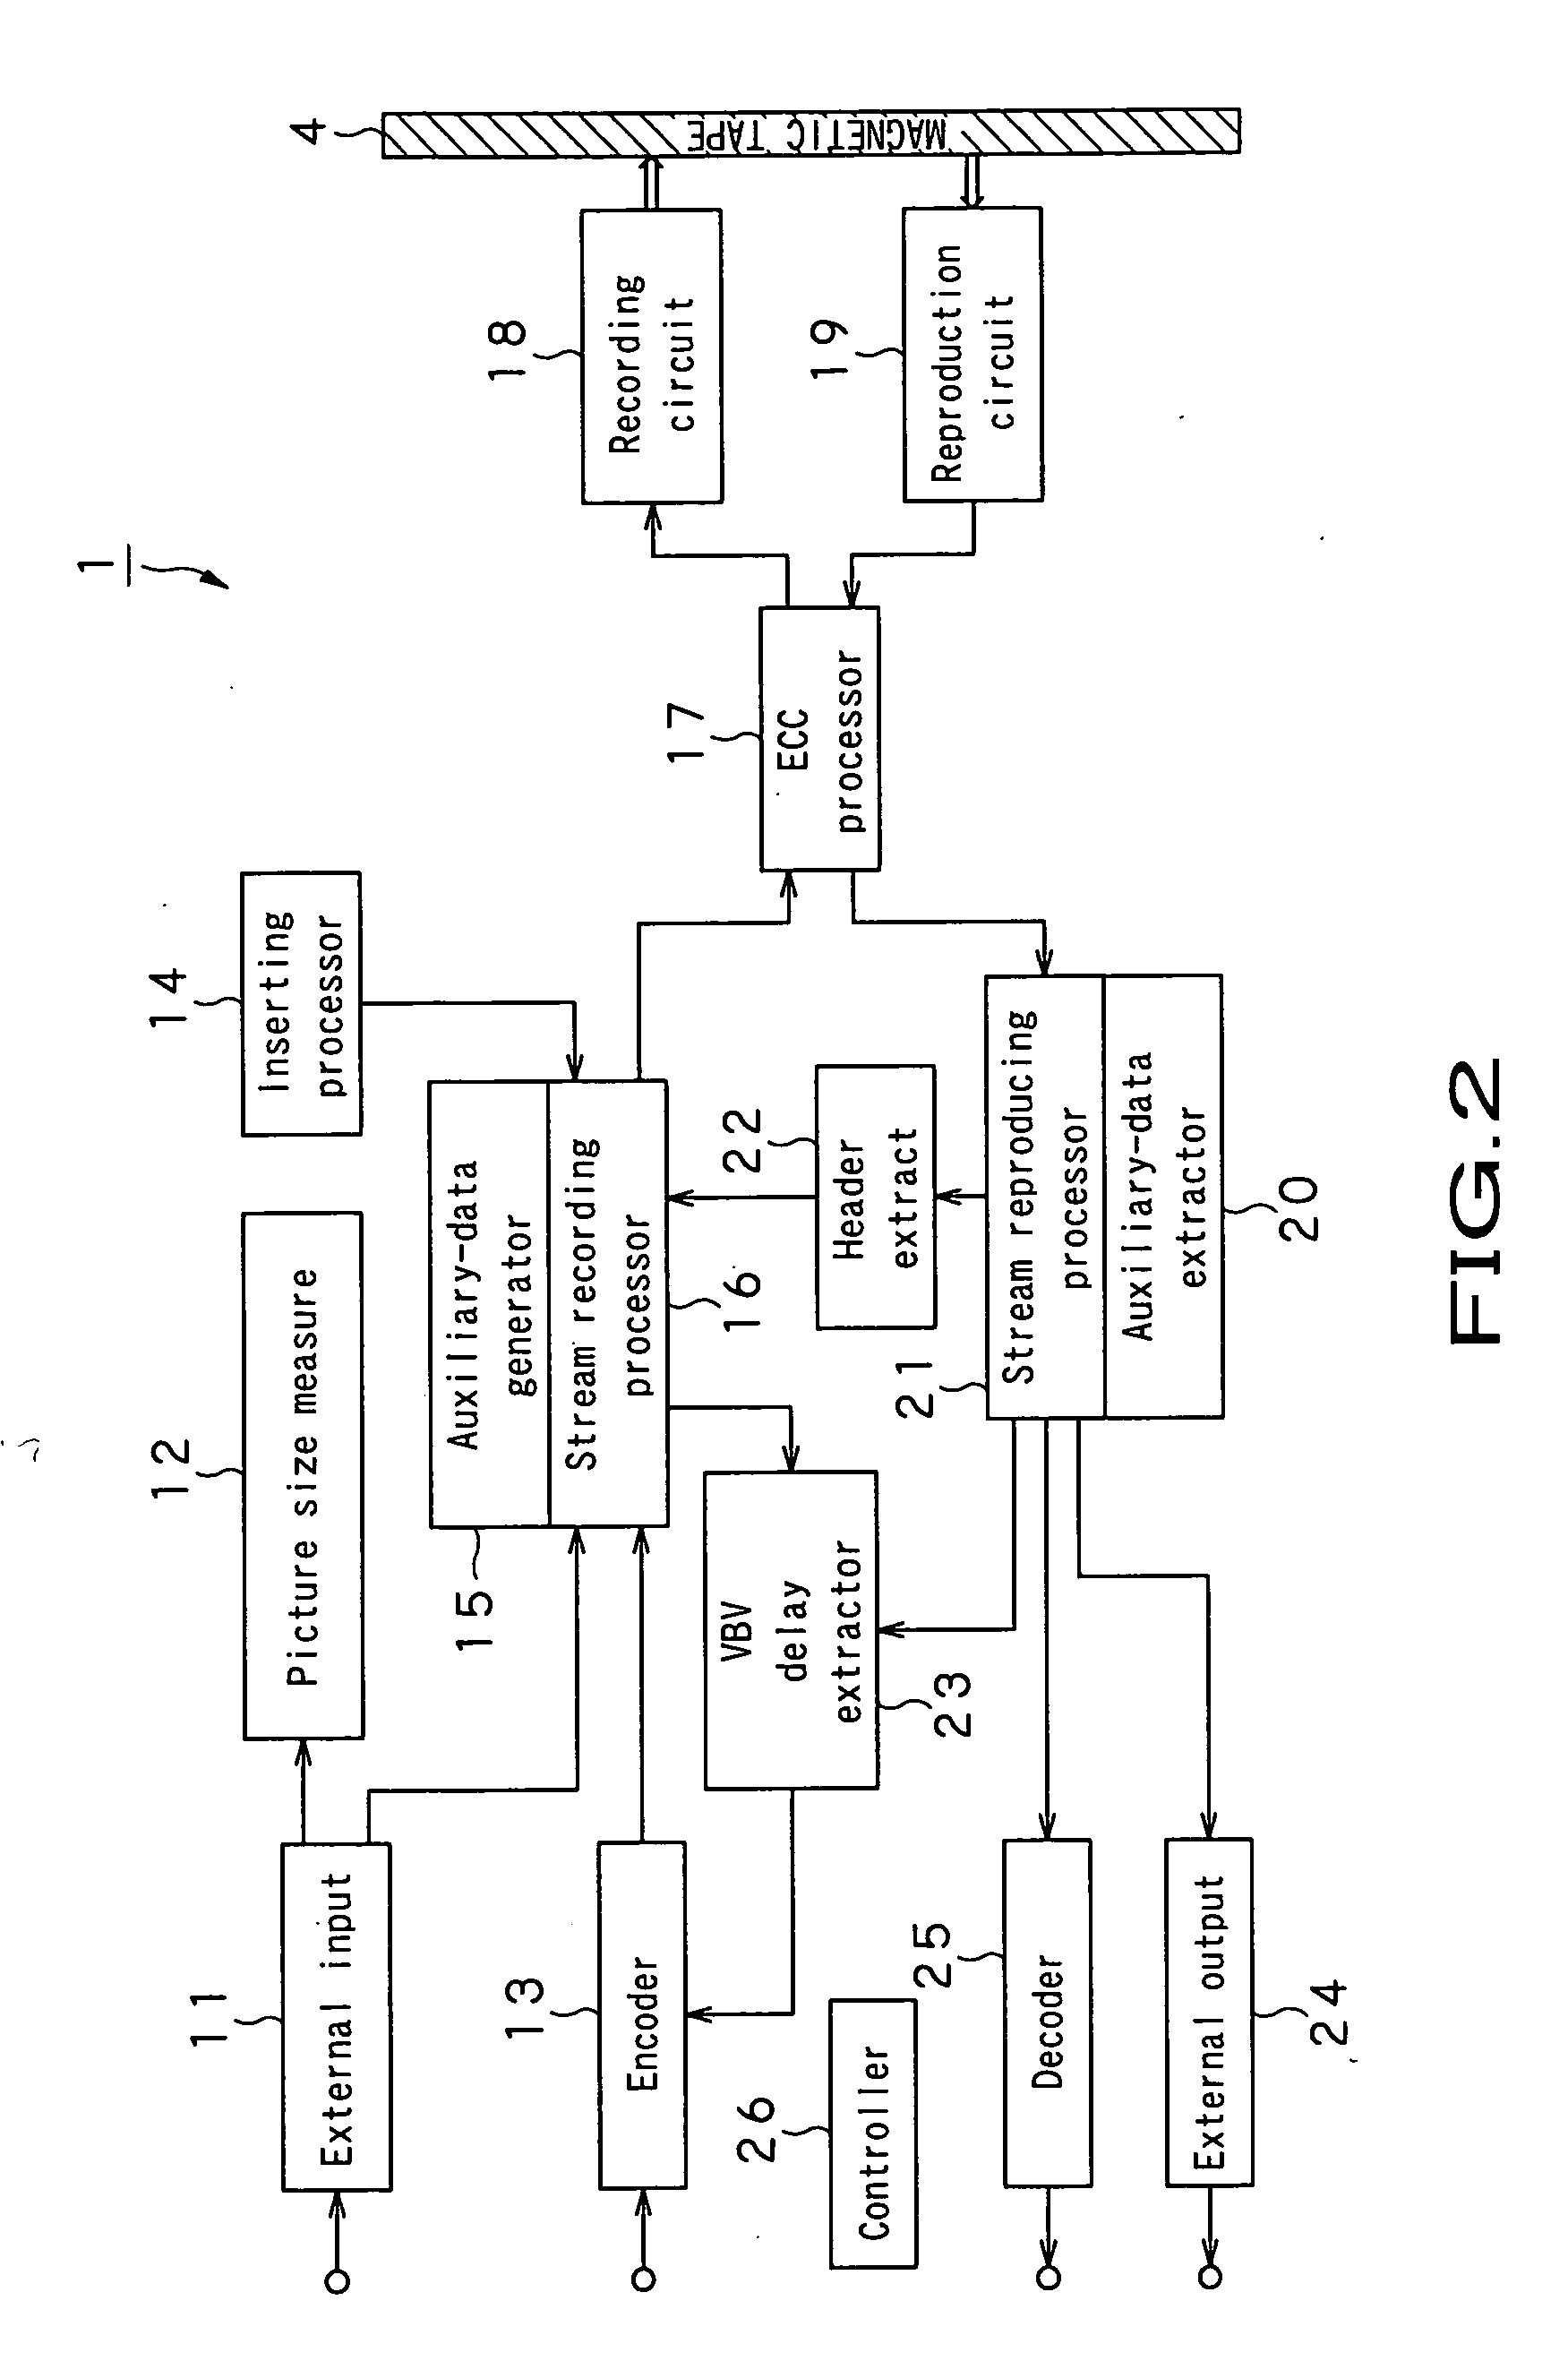 Image data processing device and method